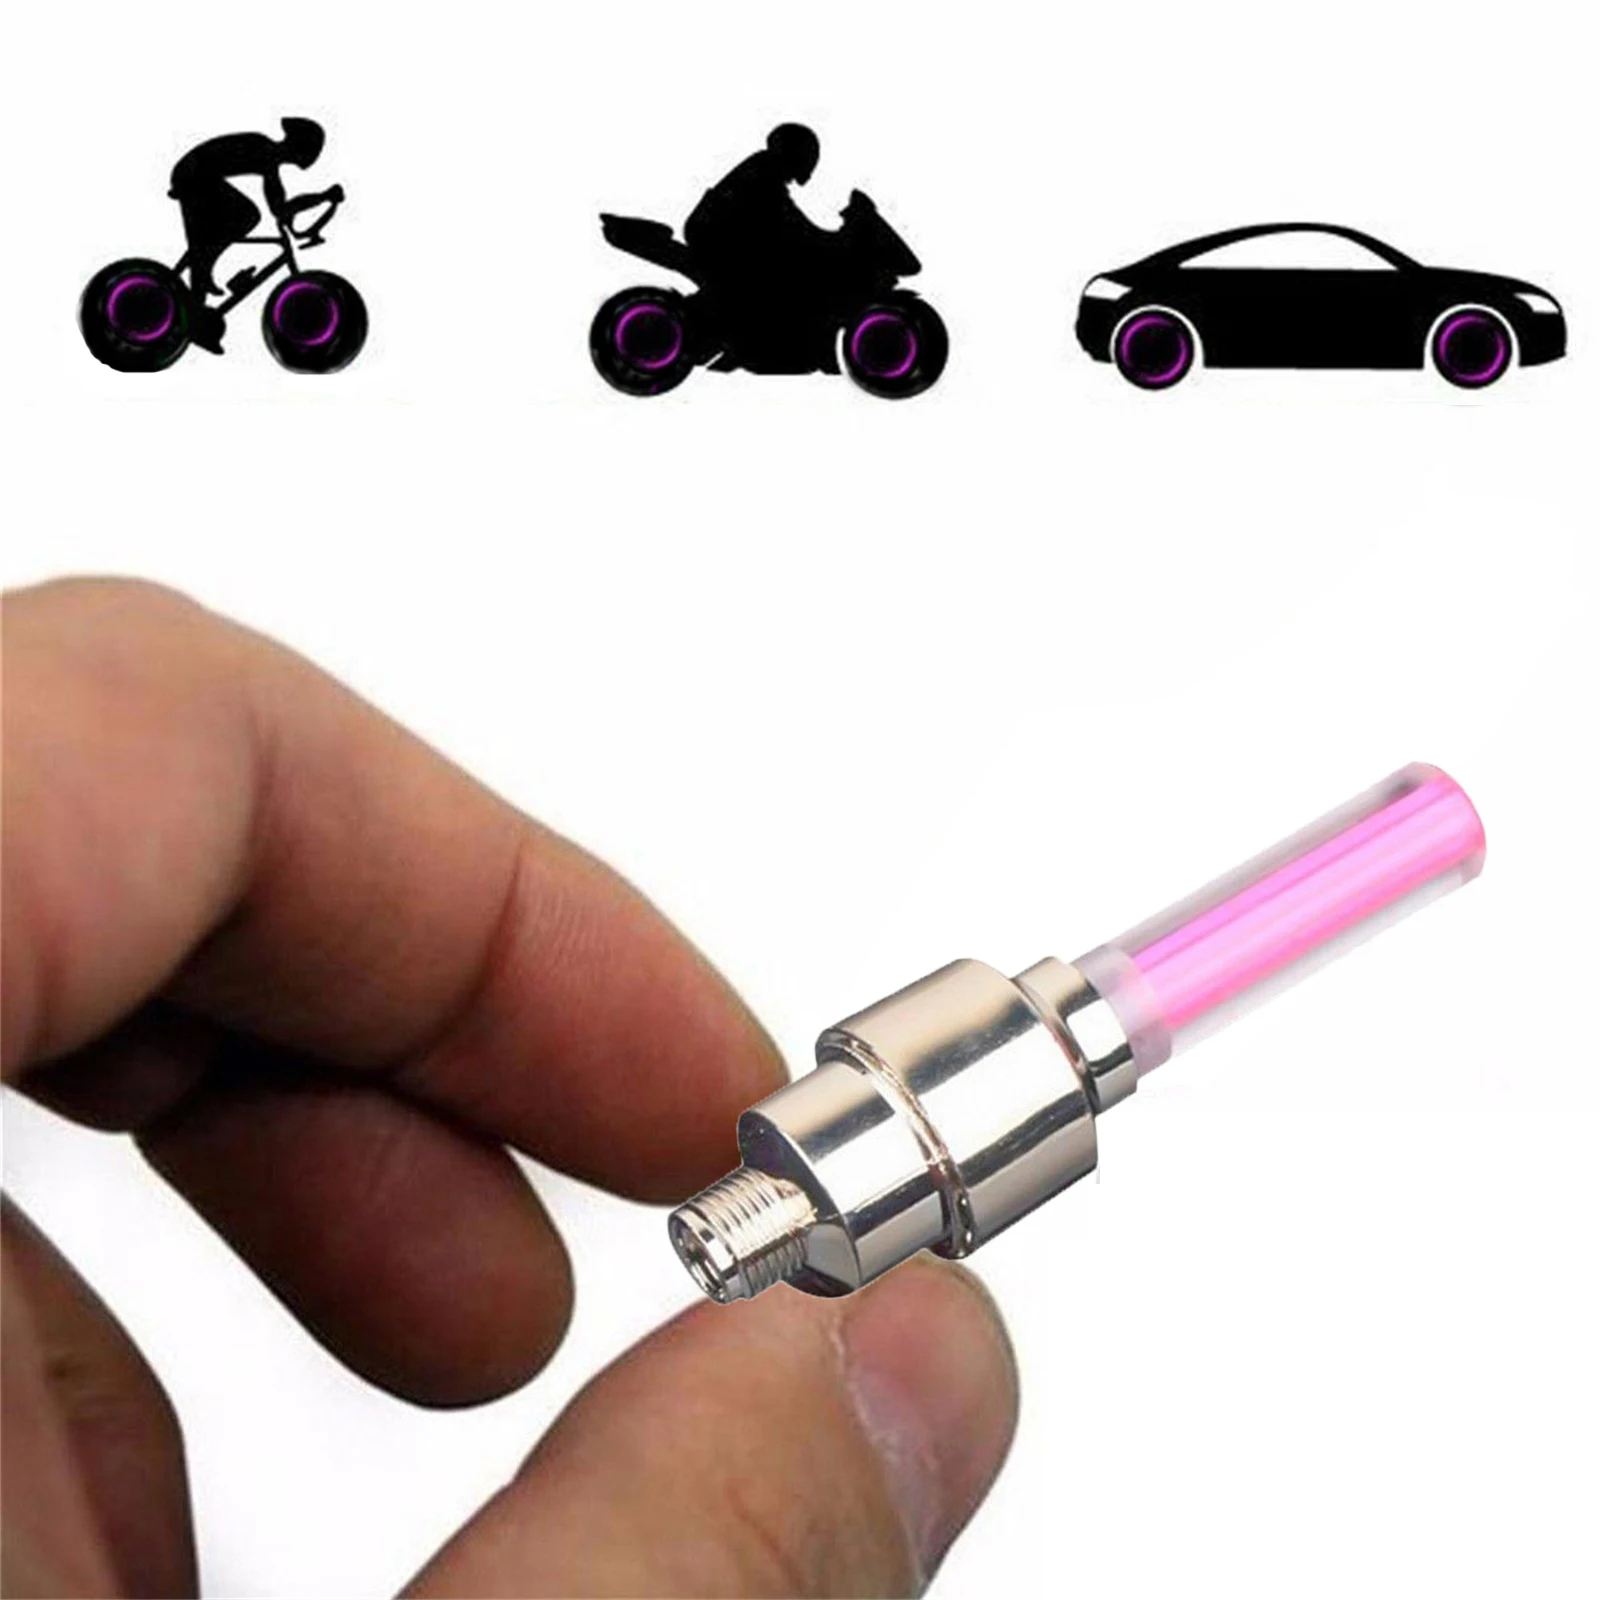 

Pink Flashing Waterproof LED Bicycle Wheel Lights Tyre Valve Lights For Car Bicycle Motorcycle